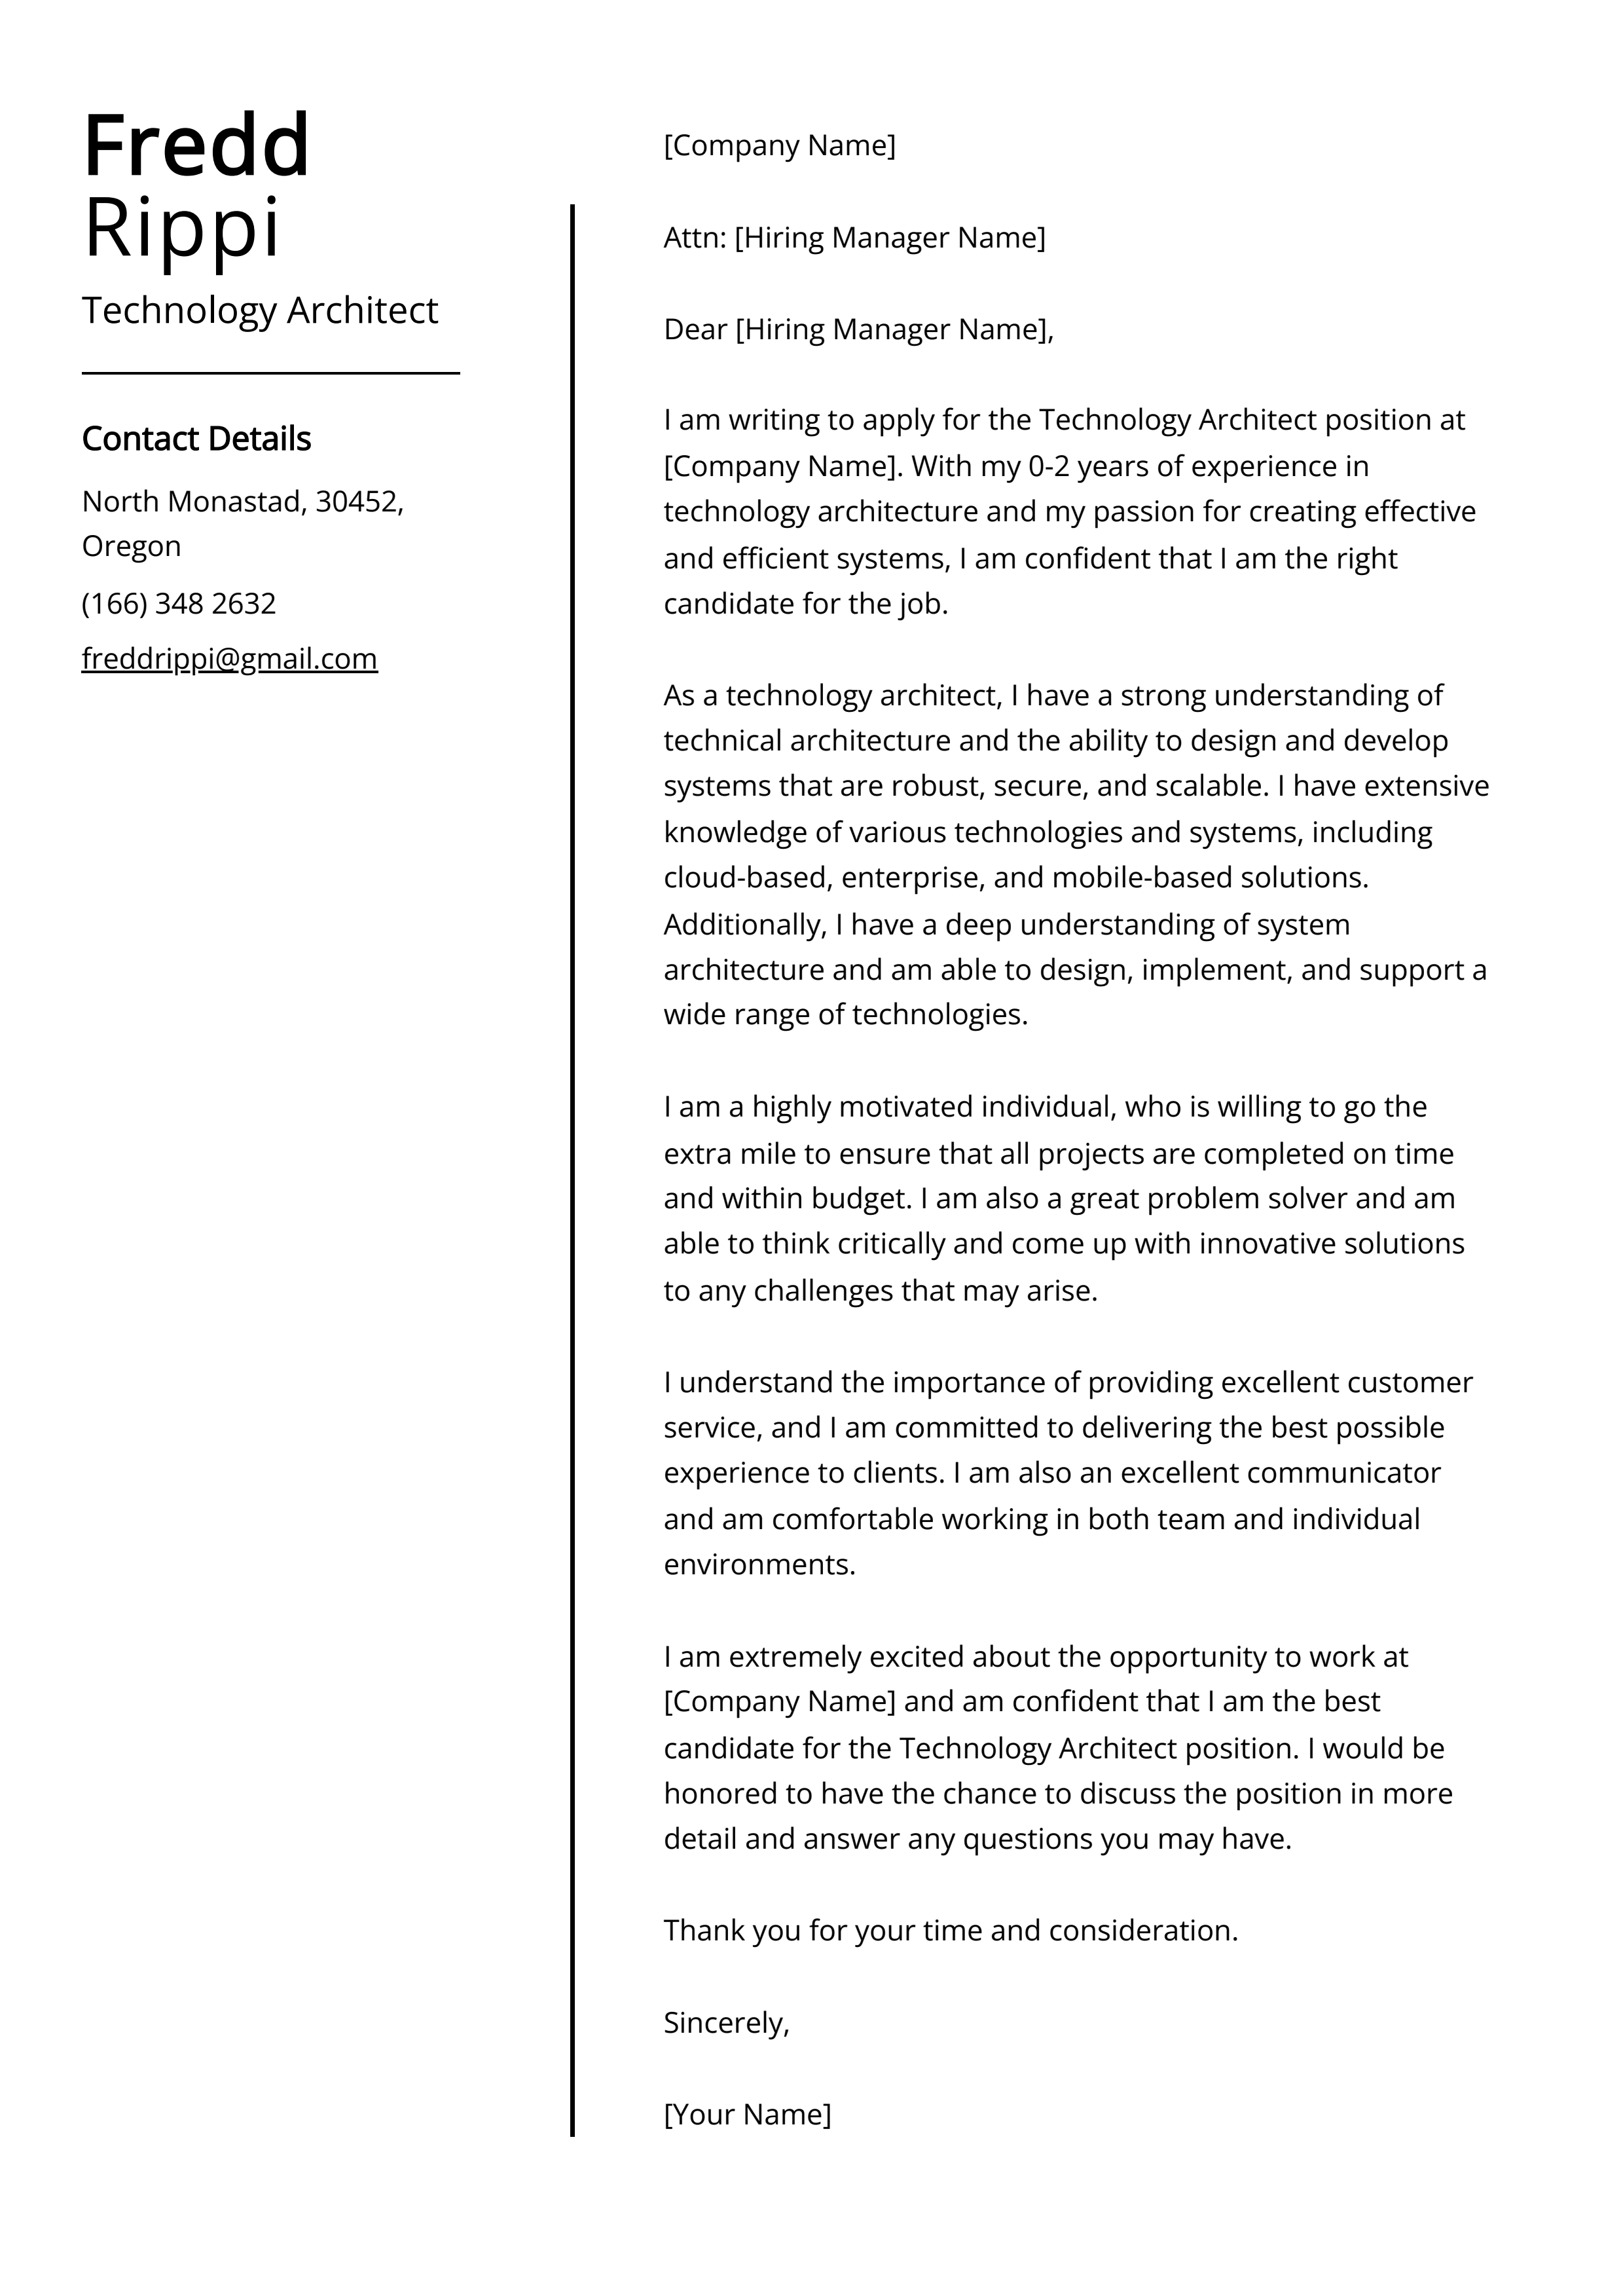 Technology Architect Cover Letter Example